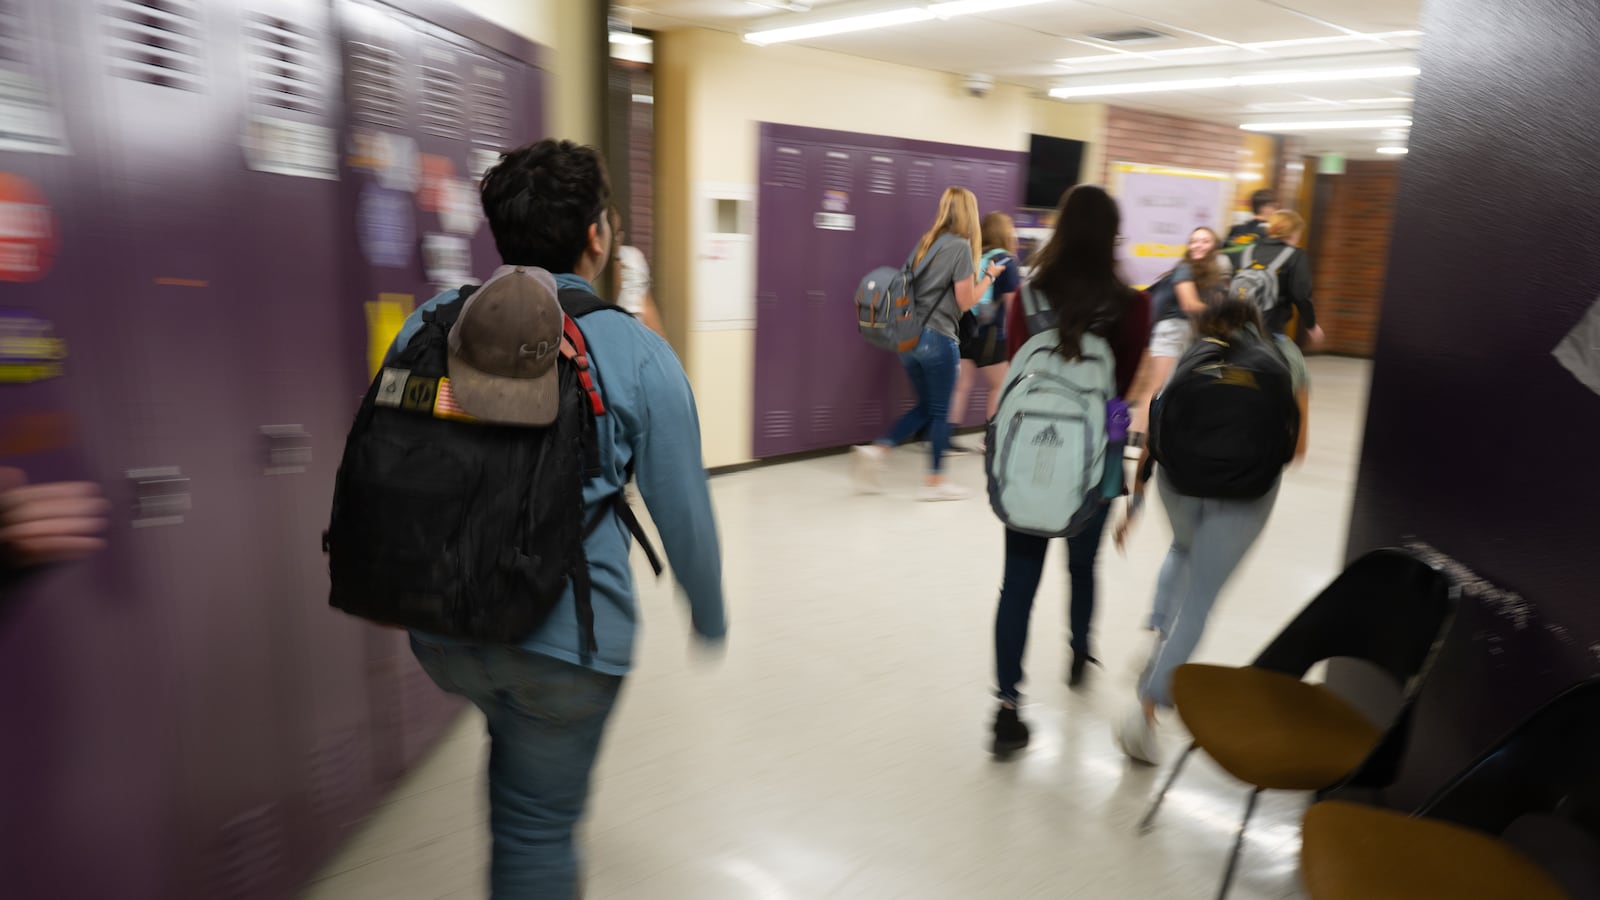 A boy wearing a backpack walks down a school hallway with purple lockers, while a group of students walks ahead of him.